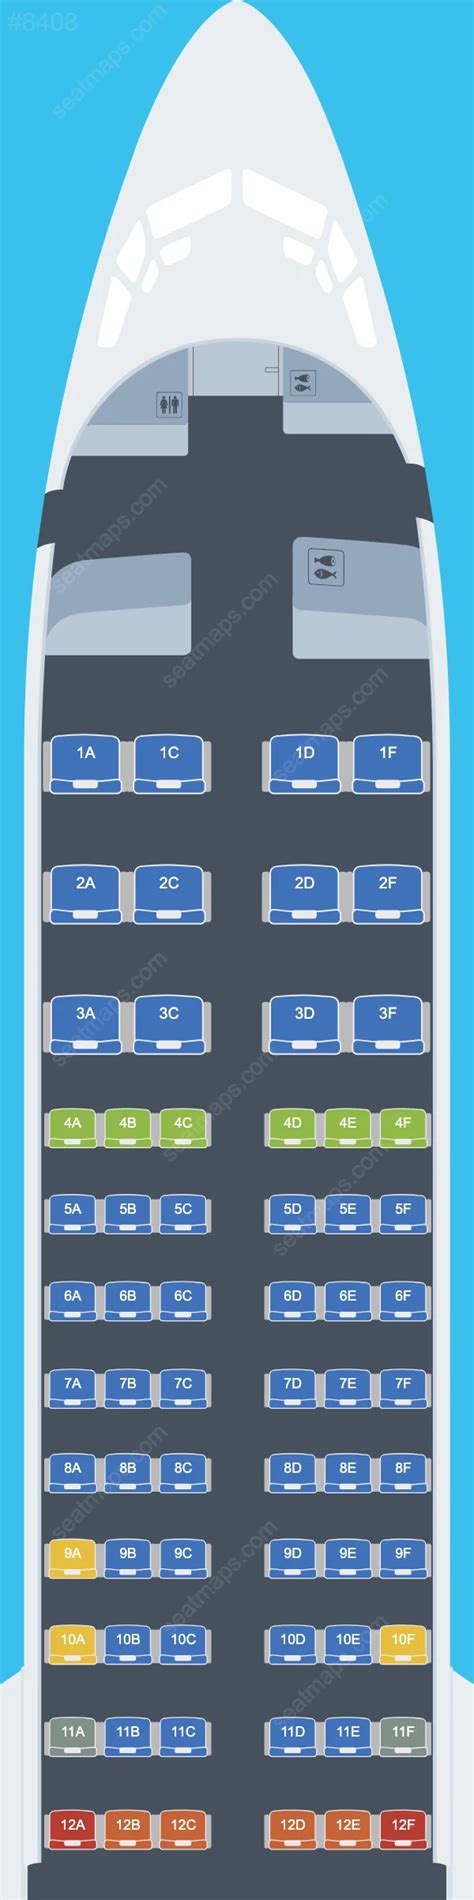 Seat Map Of Westjet Boeing 737 Max 8 Aircraft